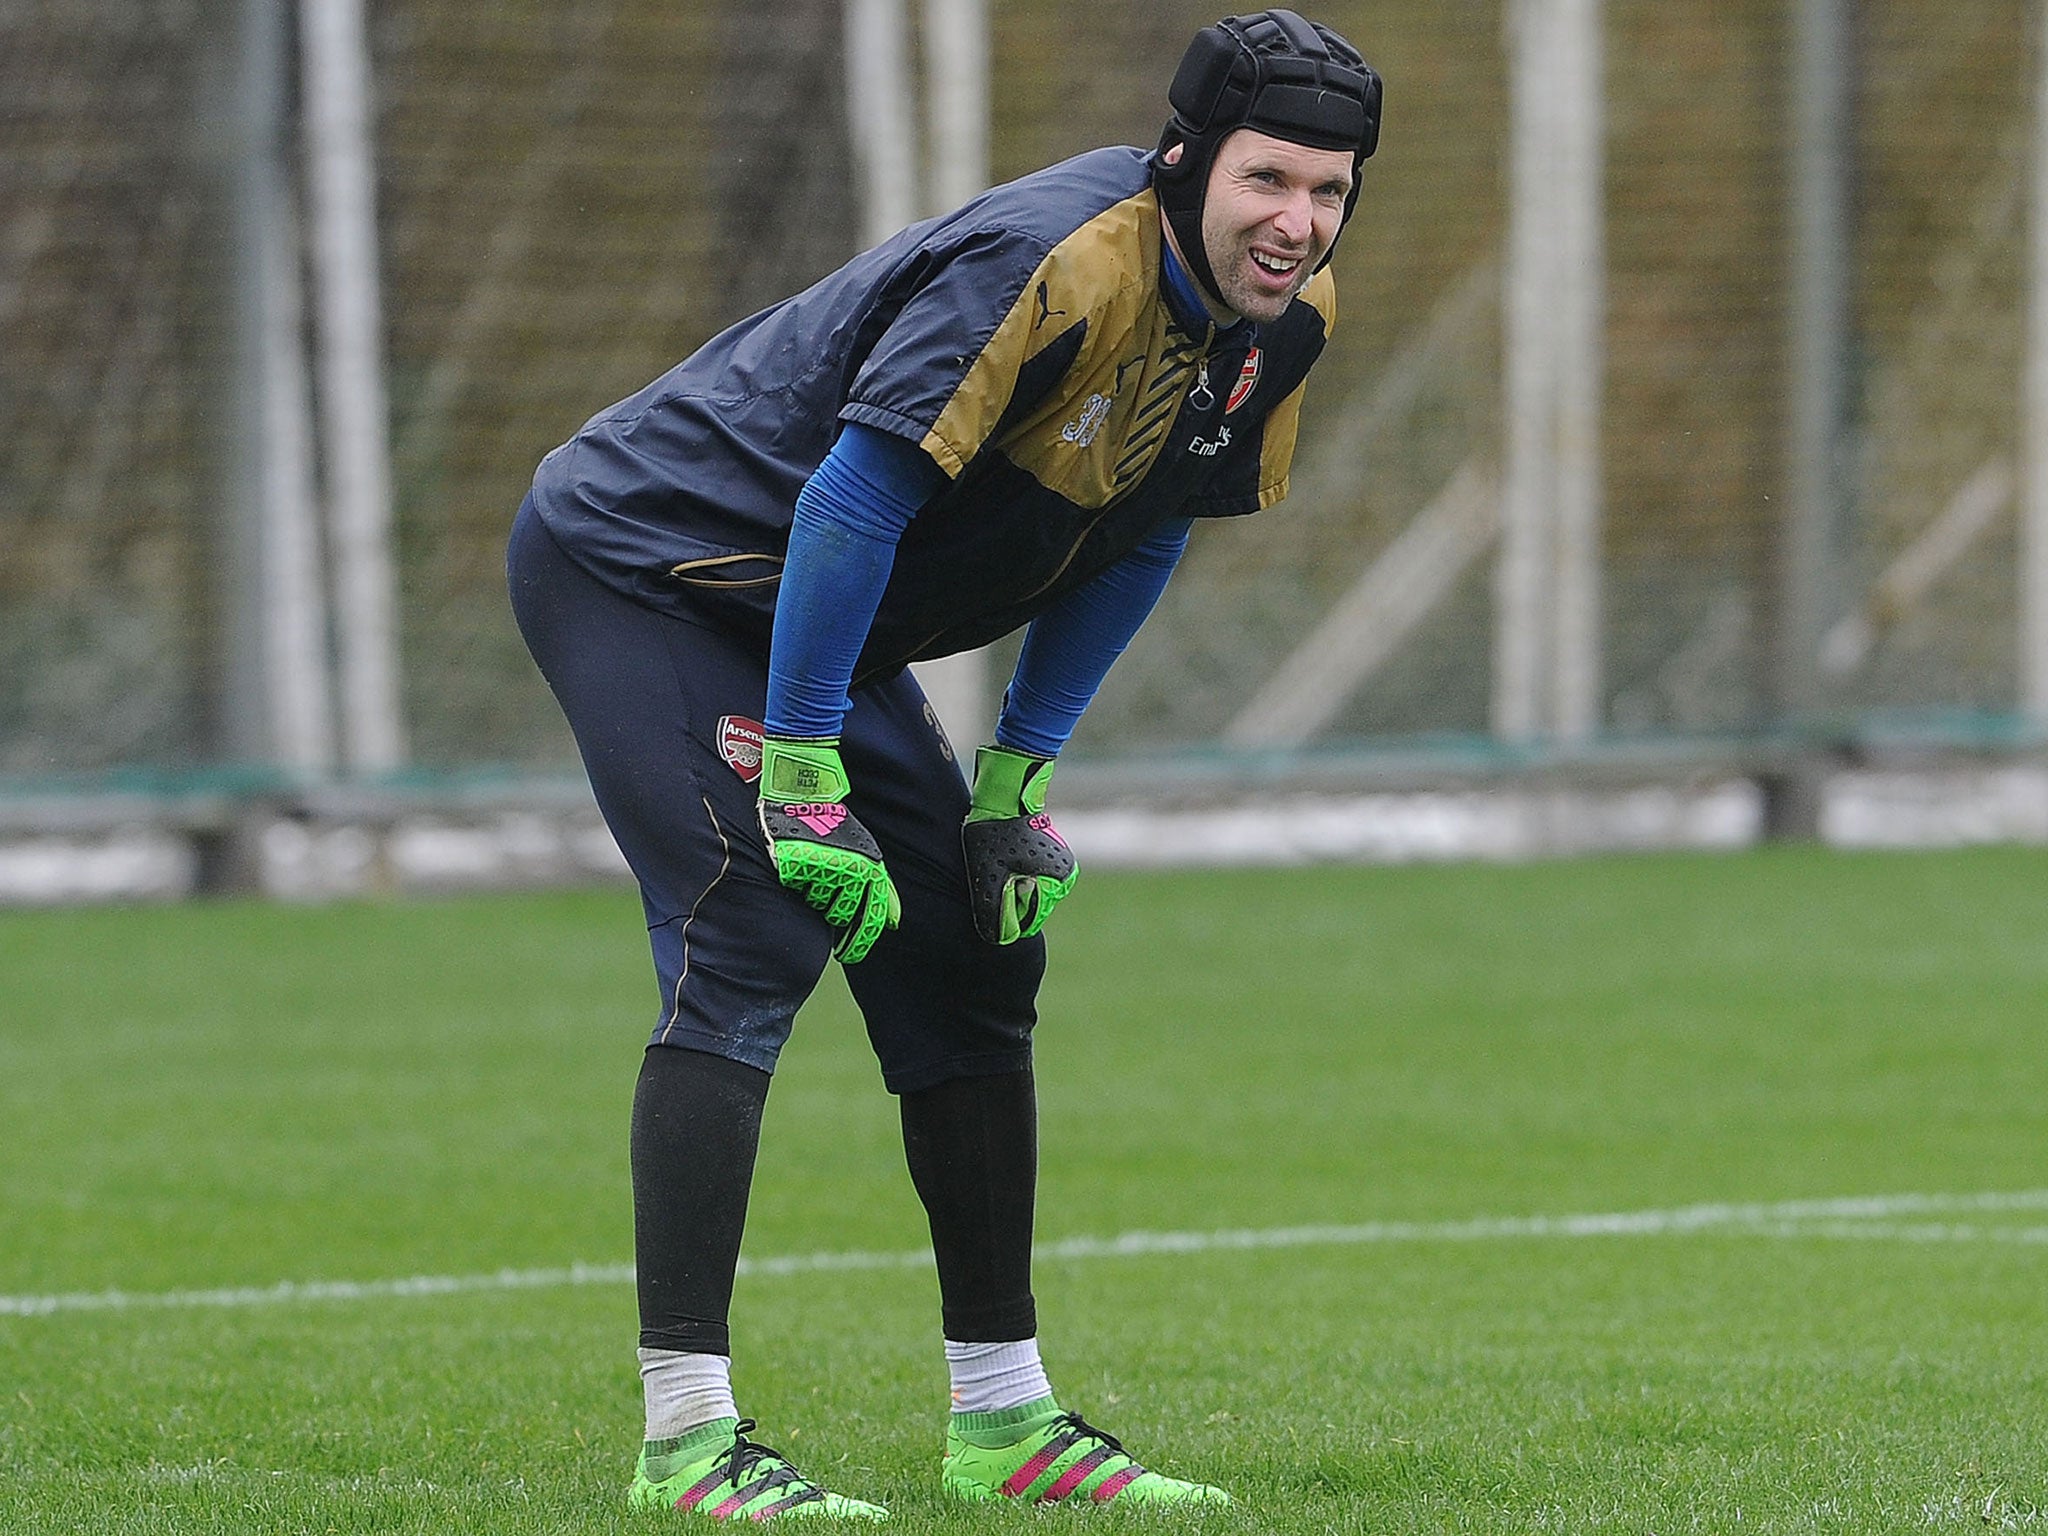 Arsenal goalkeeper Petr Cech has been ruled out for up to four weeks